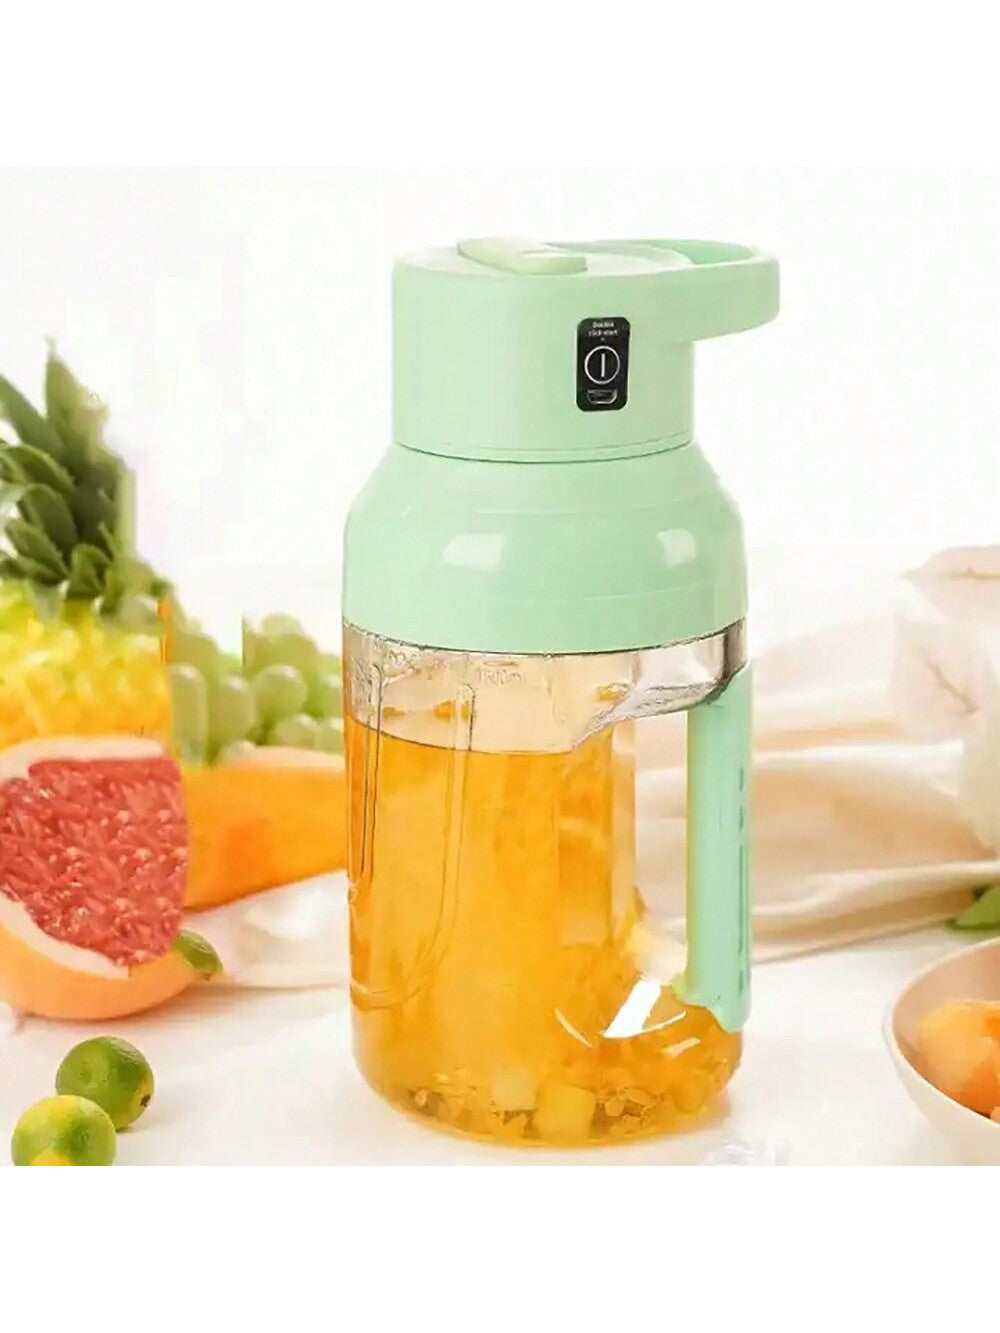 1pc 1500ml Large-capacity Green Juicer Ton-ton Electronic Portable Blender With High-speed 8-blade Good For Home, Office, And Travel-Green-1